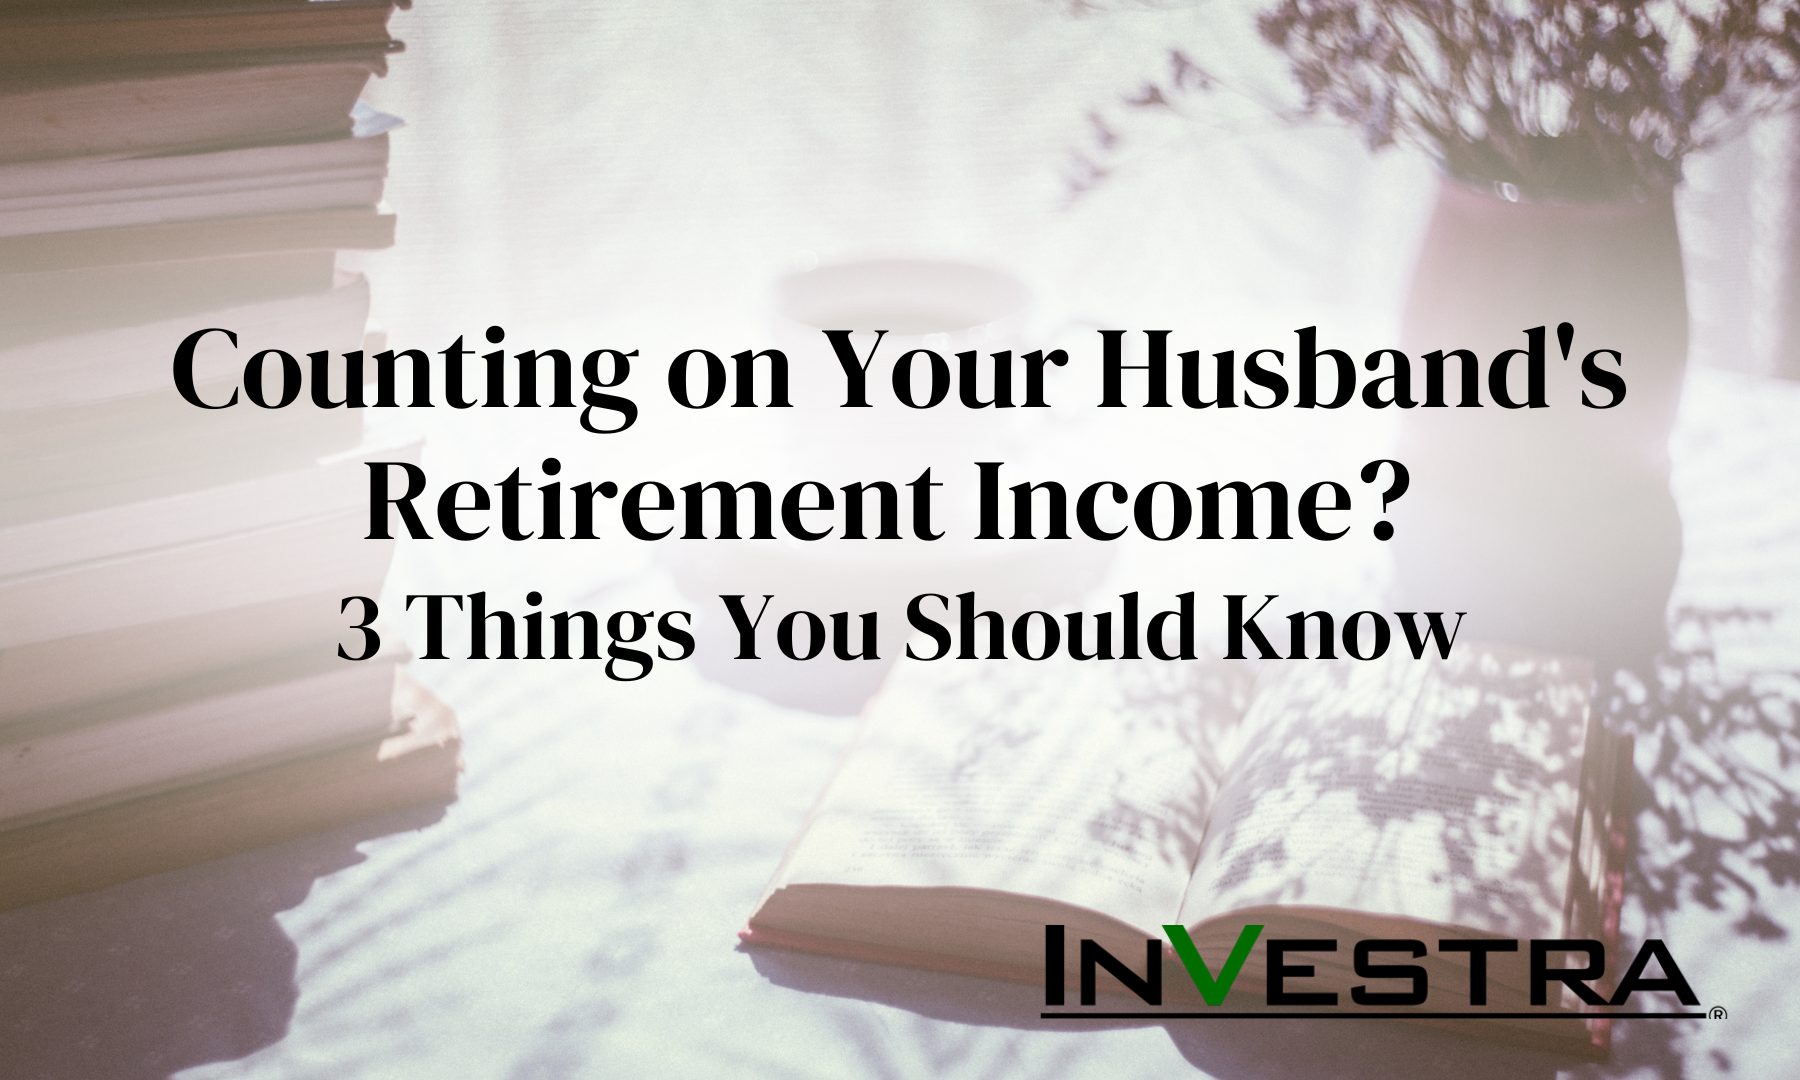 Counting on Your Husband’s Retirement Income? Three Things Women Should Know